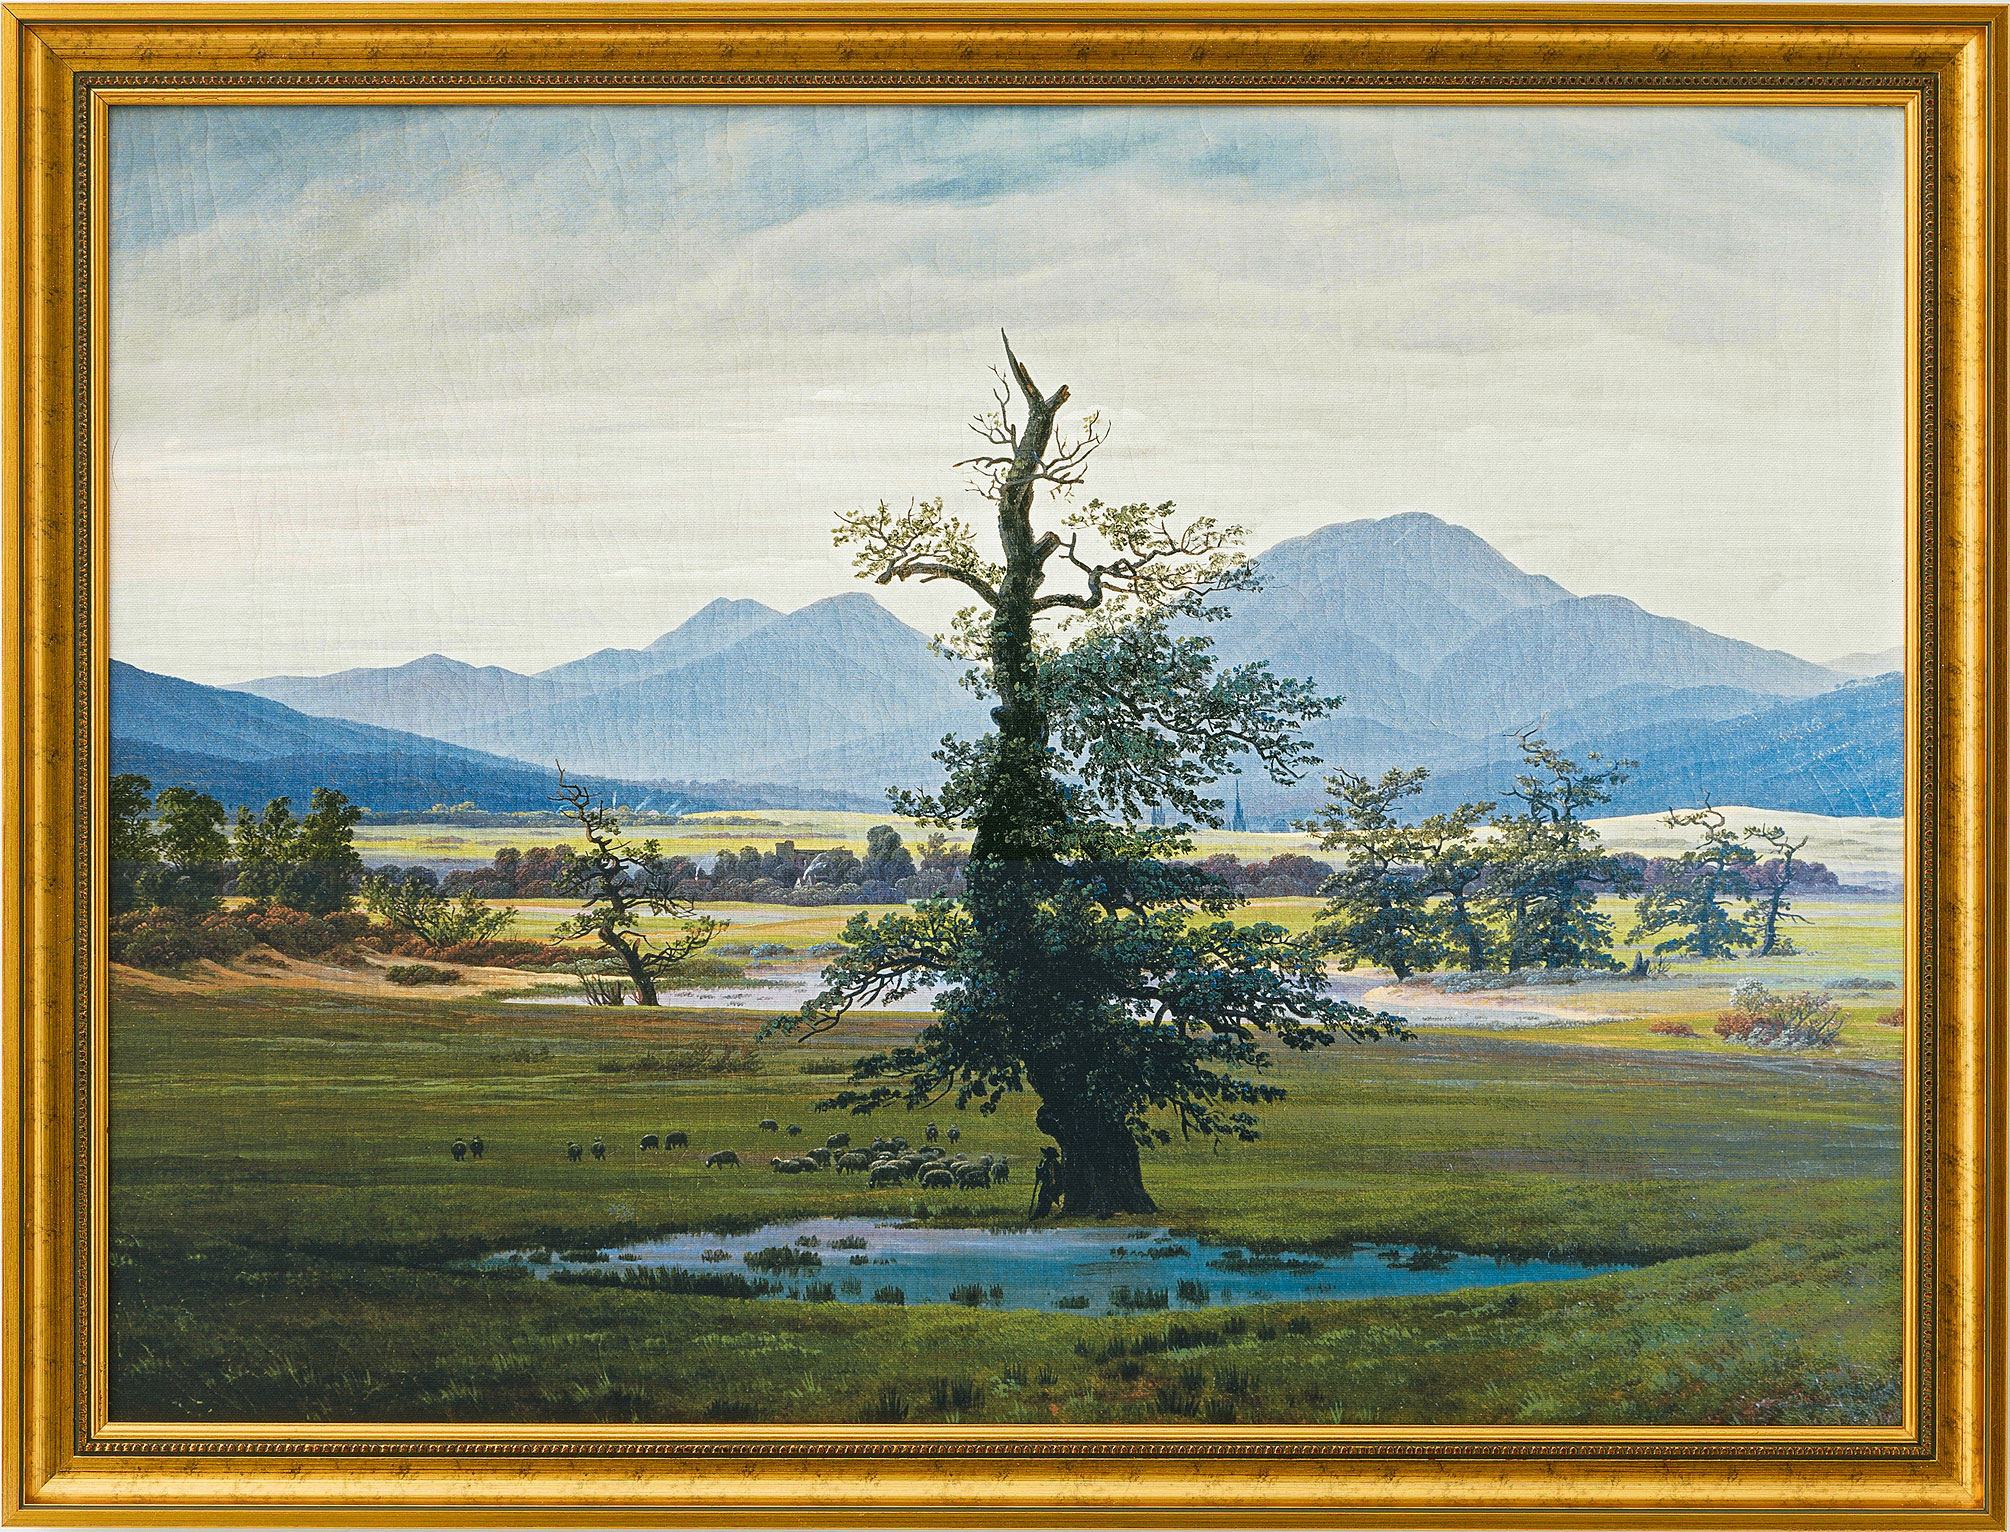 Picture "The Lonely Tree" (1821), framed by Caspar David Friedrich